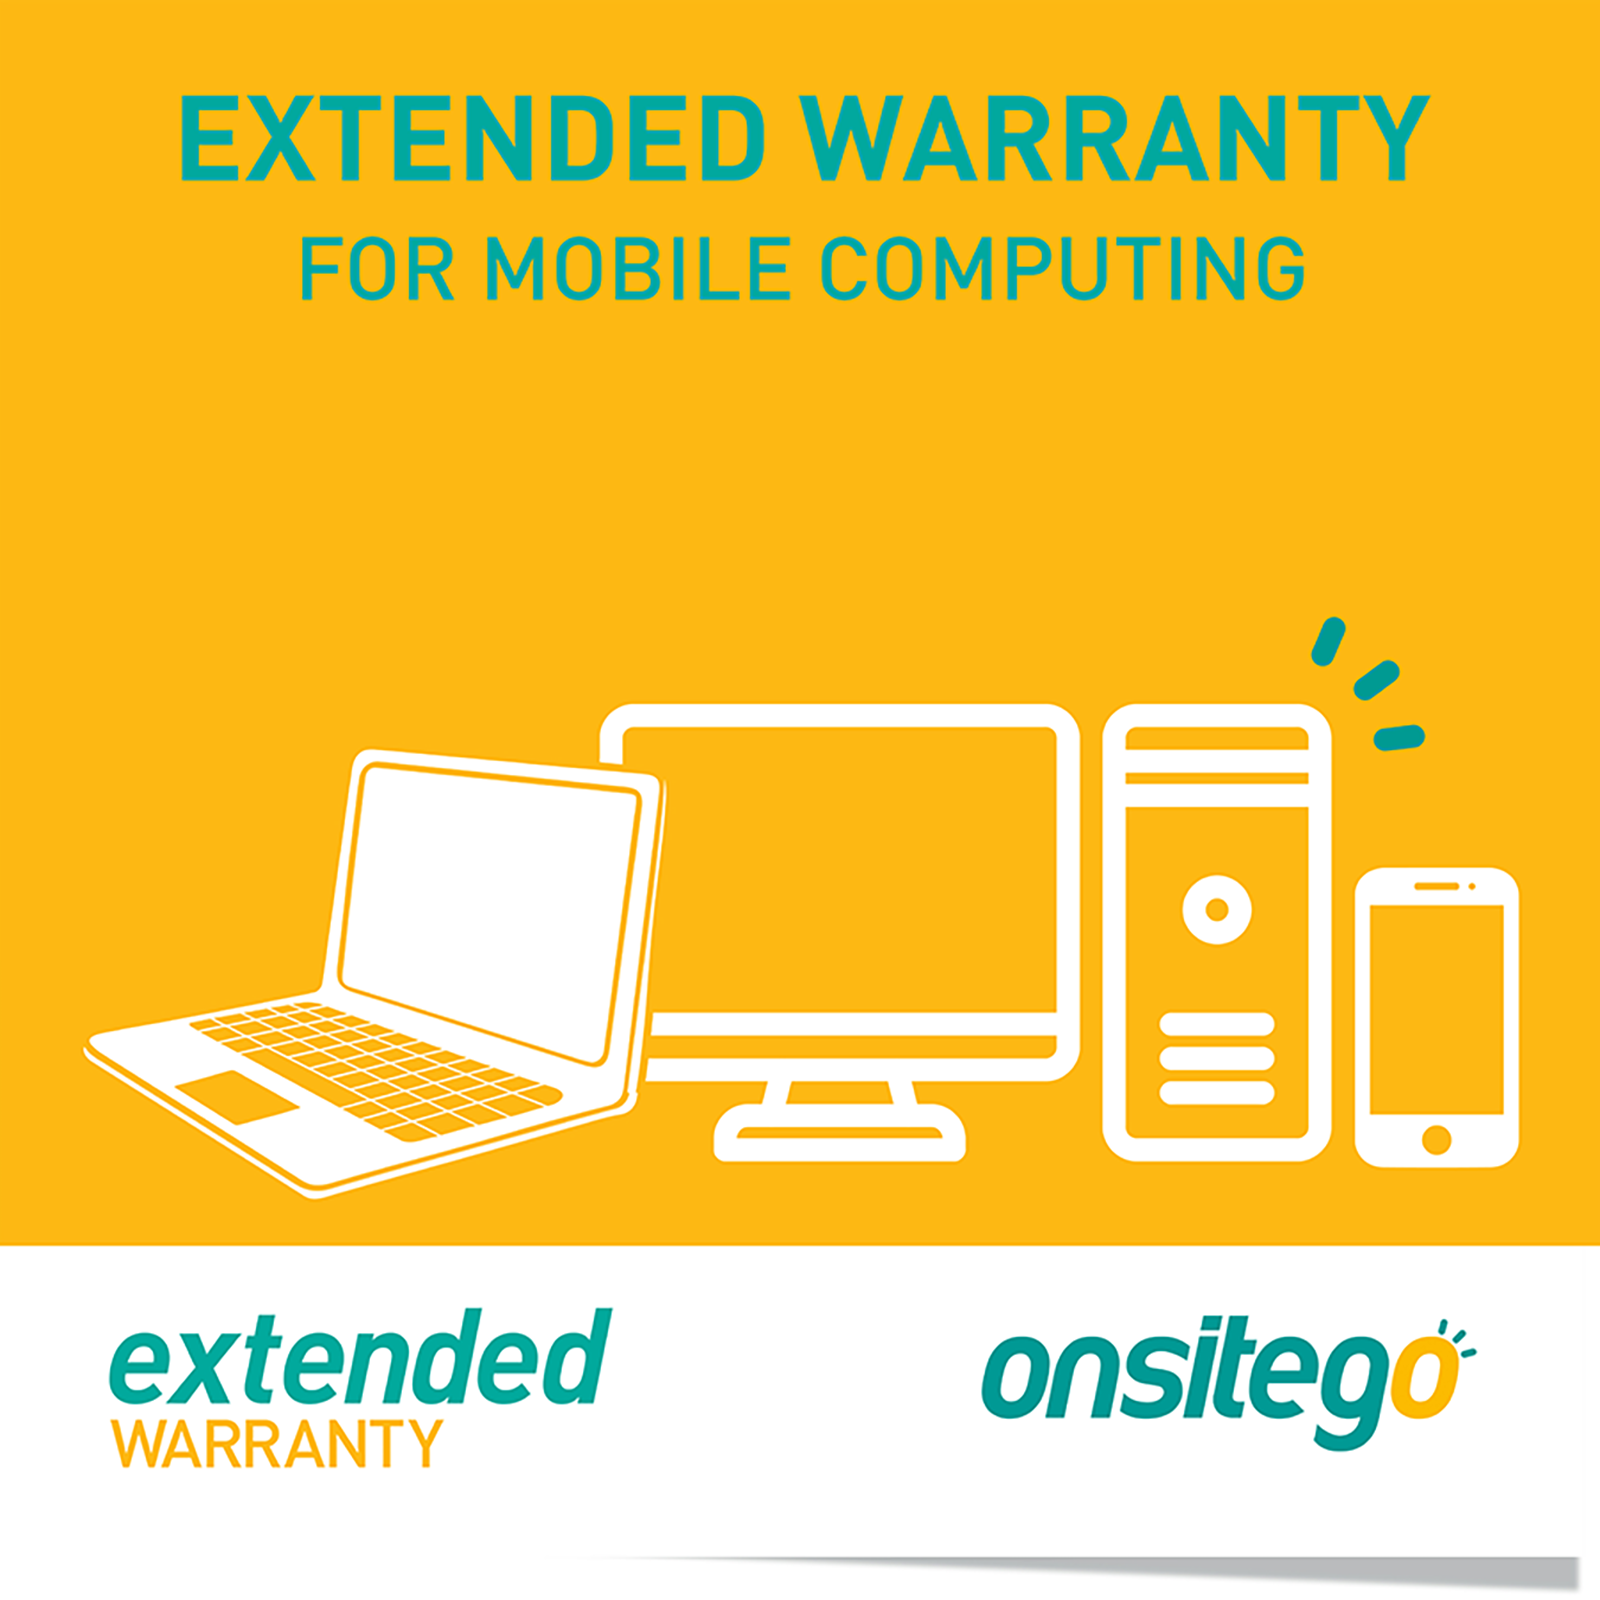 Onsitego 2 Year Extended Warranty for Laptop (Rs.350,000 - Rs.400,000)_1